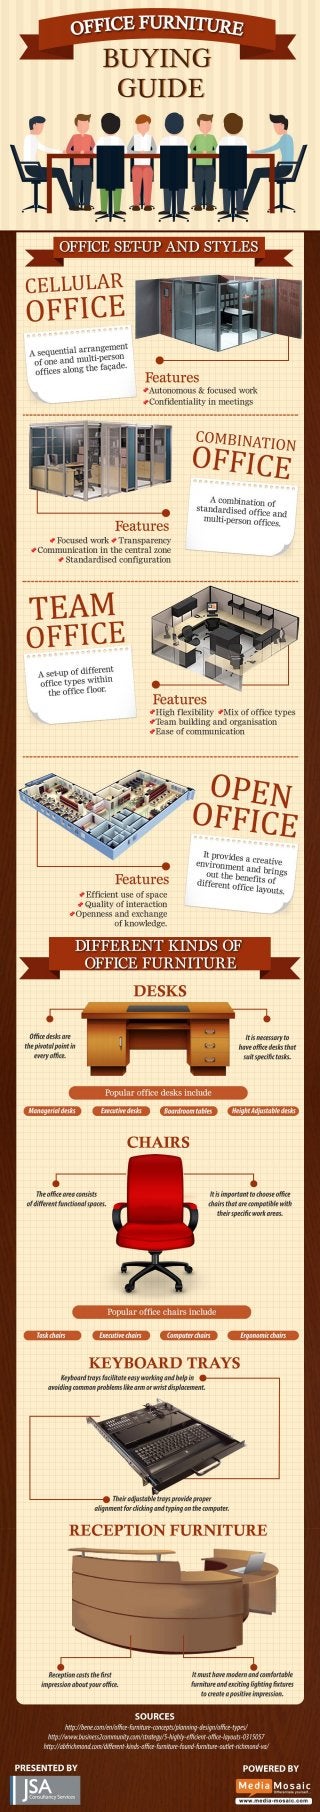 Office Furniture Buying Guide – Infographic – JSA Consultancy Services